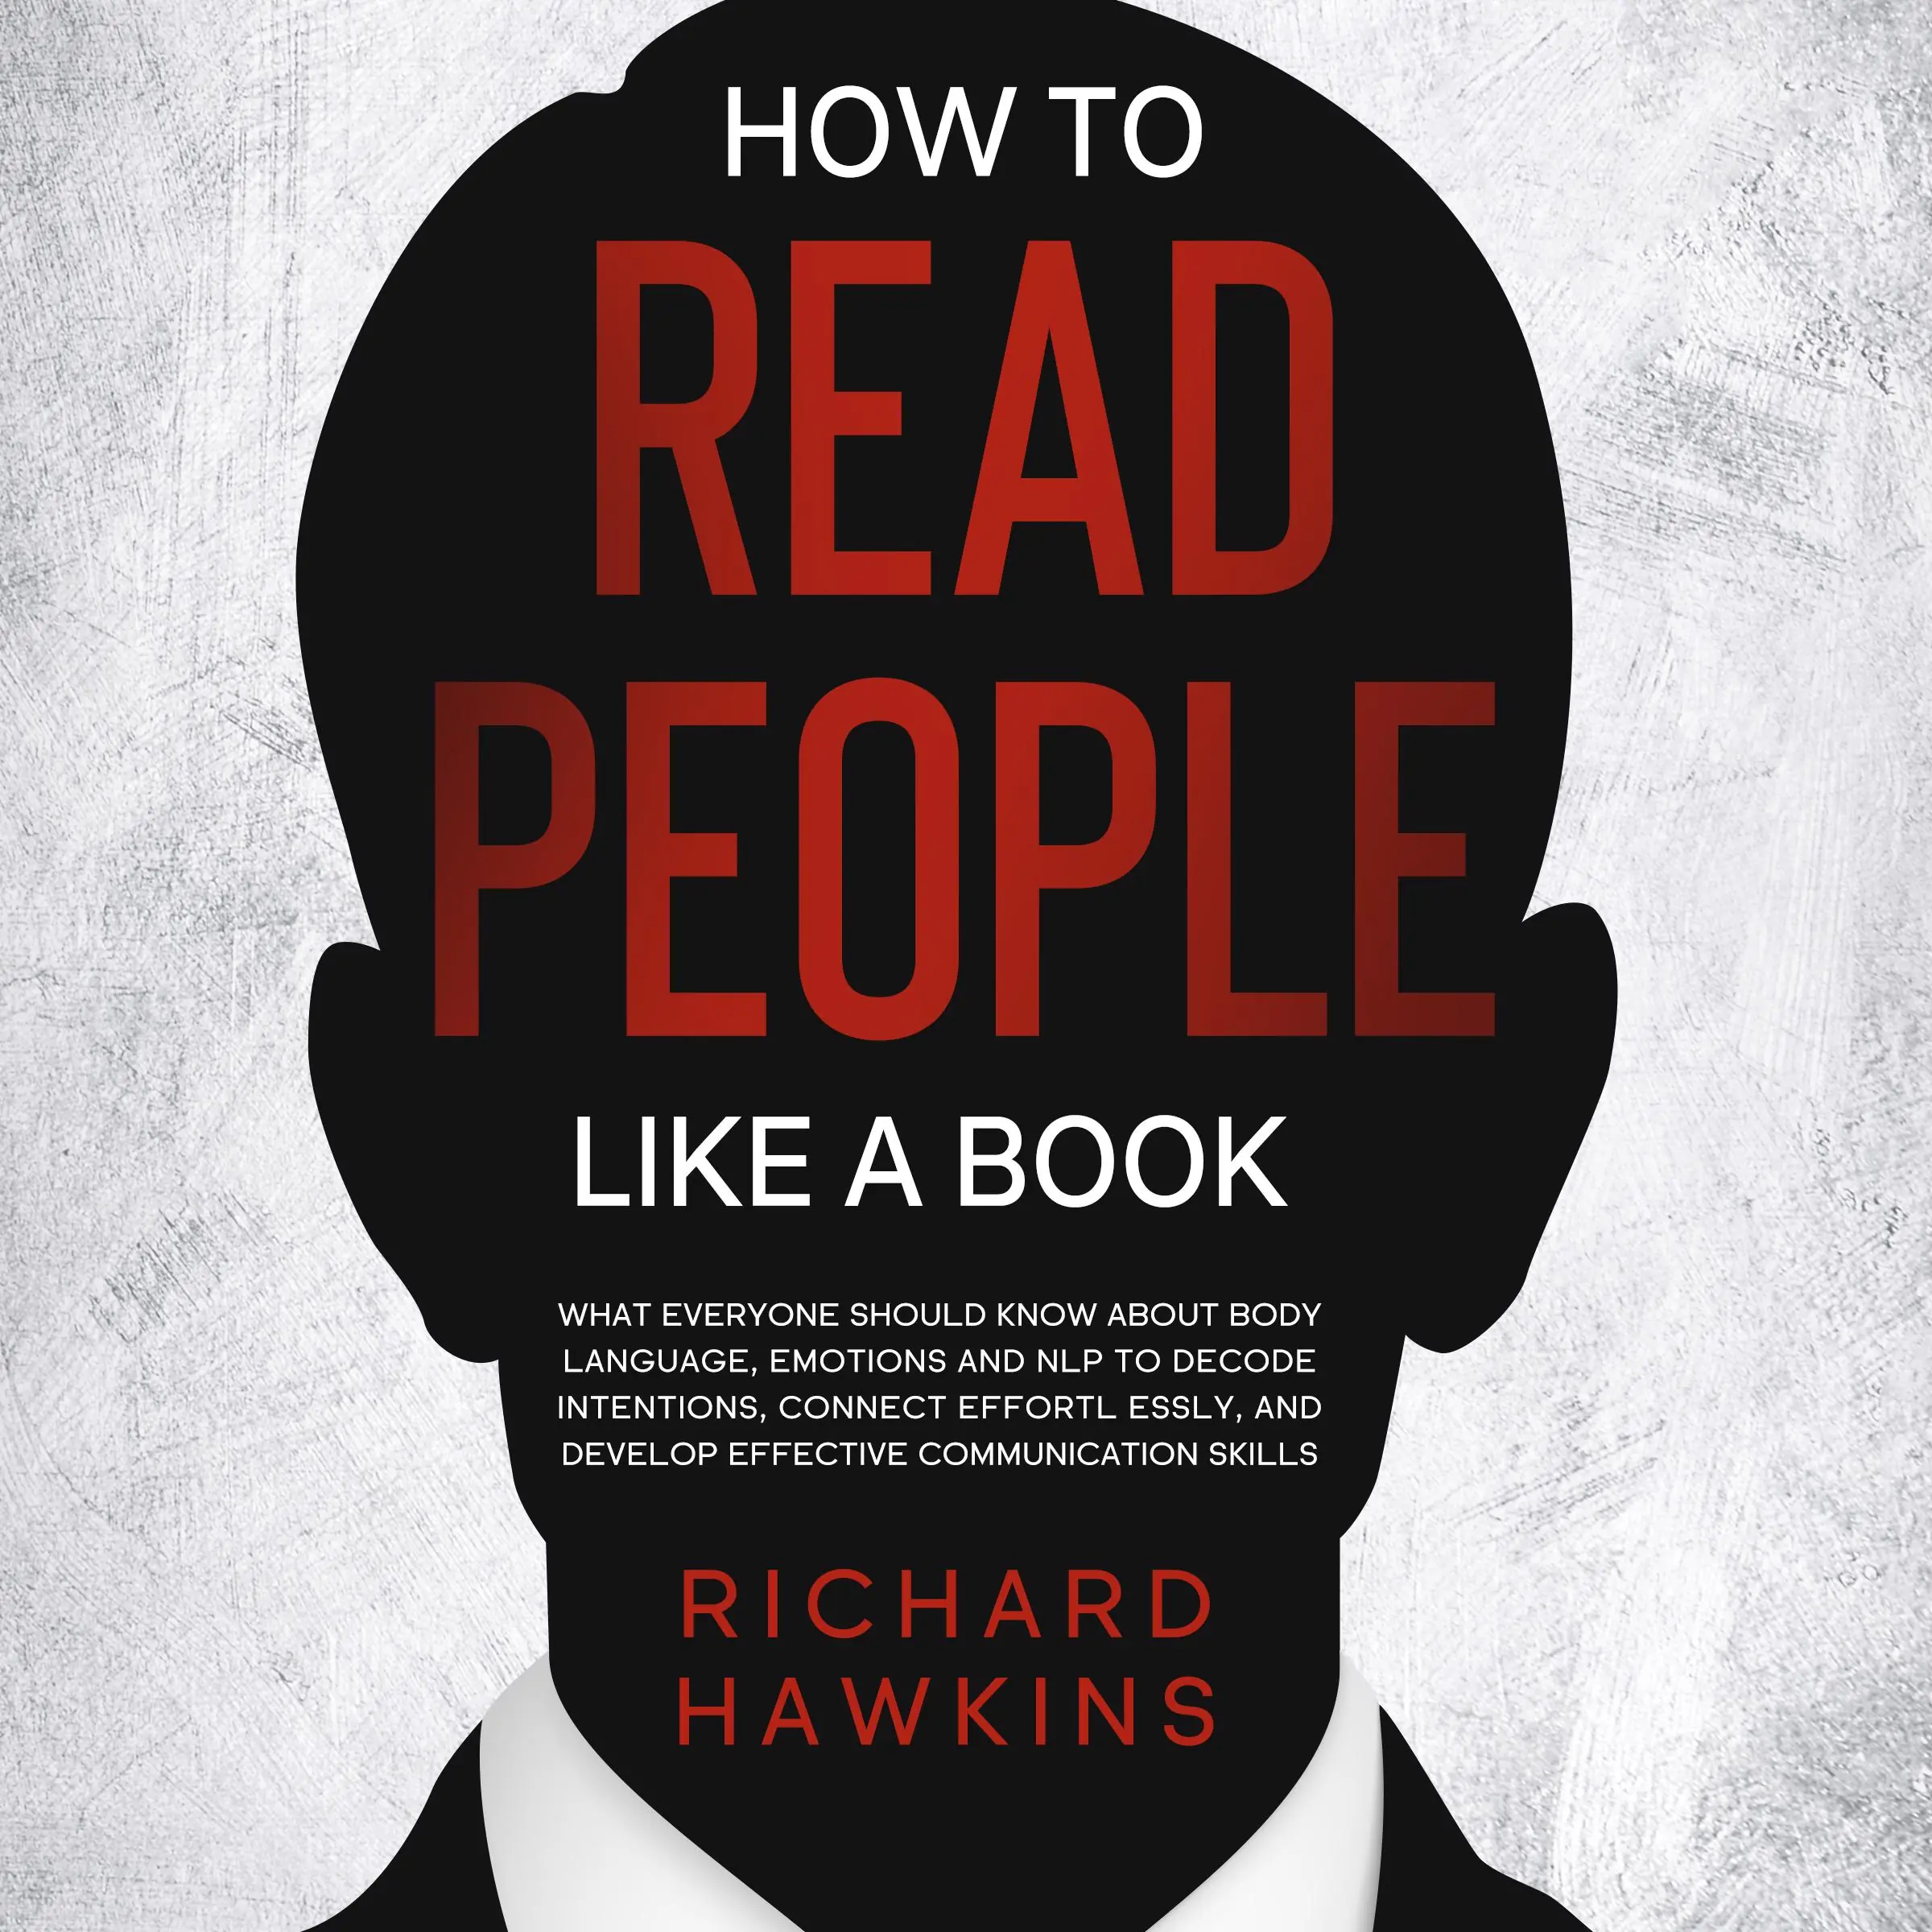 How to Read People Like a Book Audiobook by Richard Hawkins